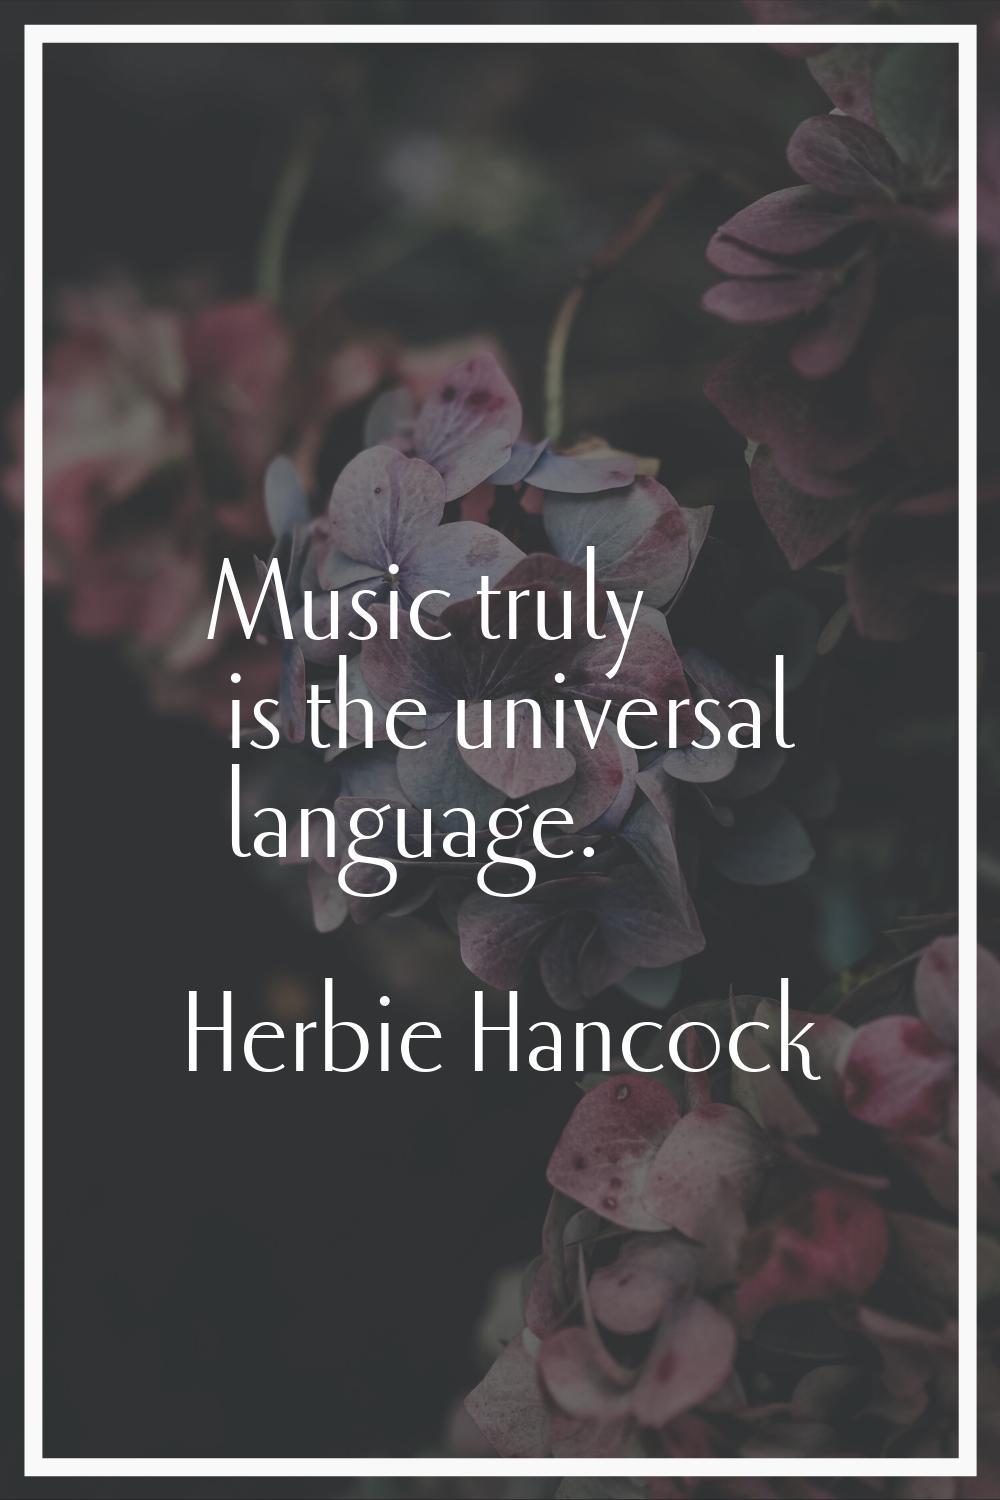 Music truly is the universal language.